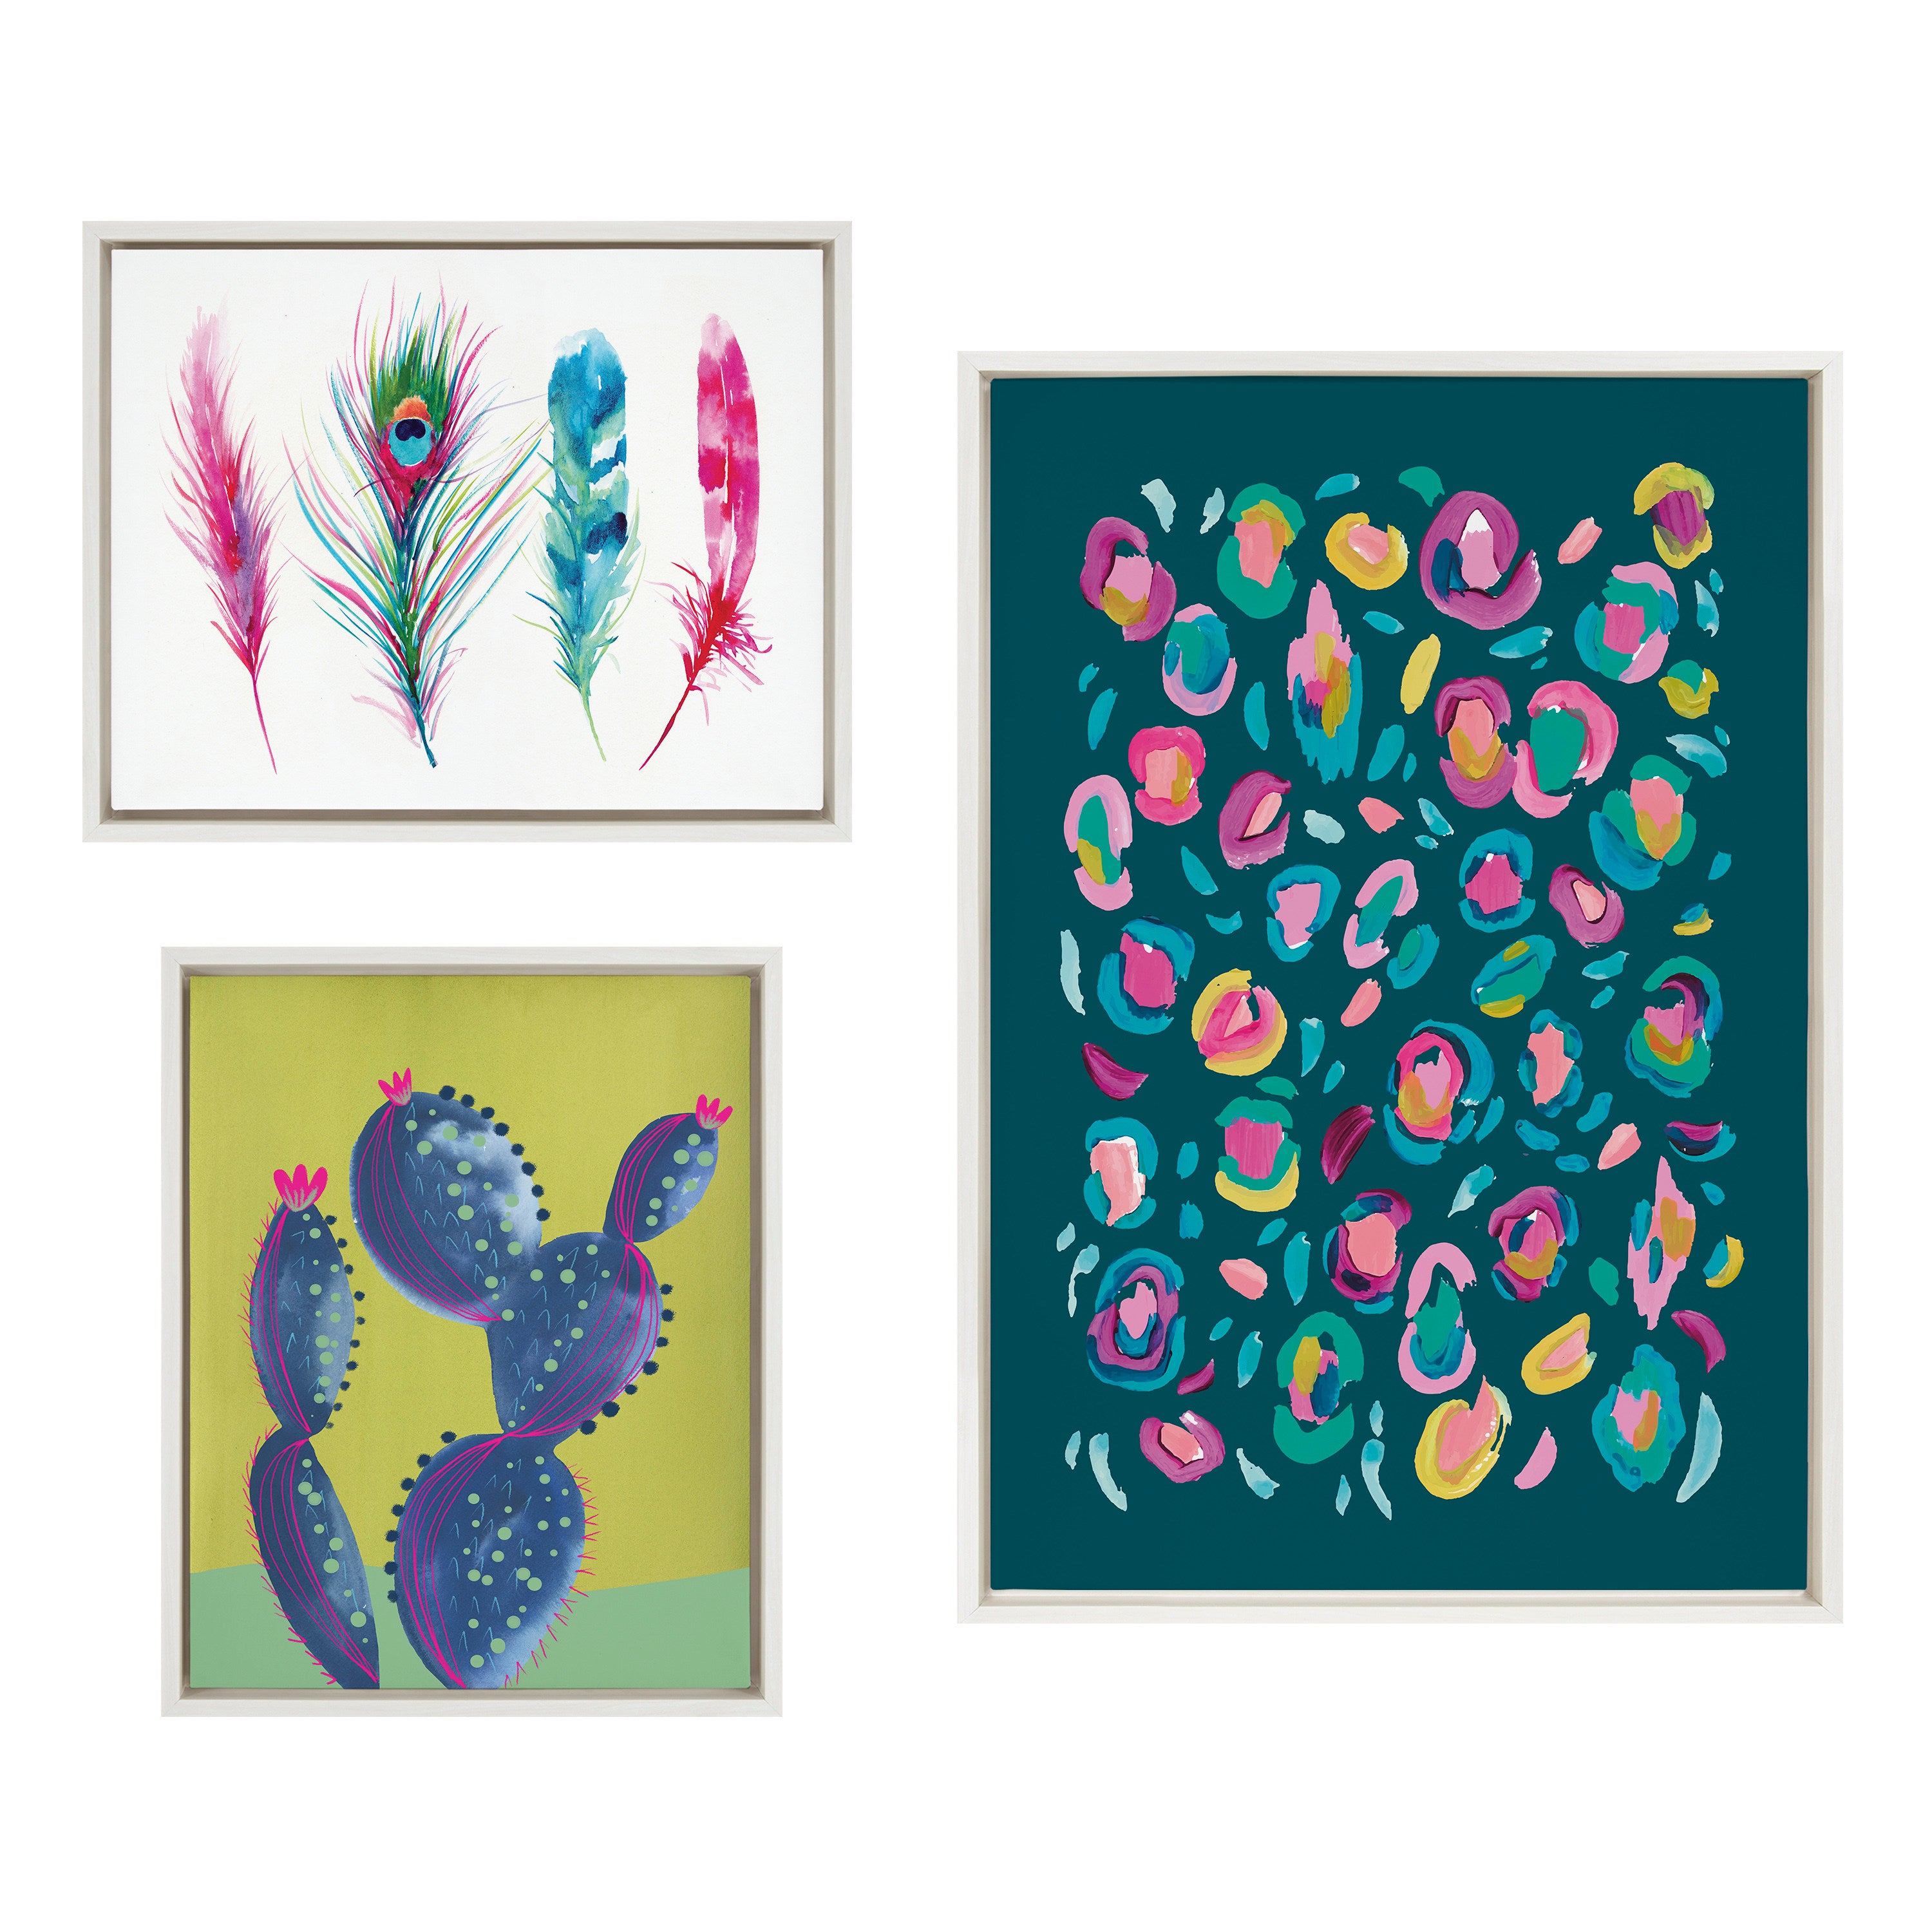 Sylvie Leopard 3, Feather Four and 800 Folk Cactus v2 Framed Canvas by Jessi Raulet of Ettavee